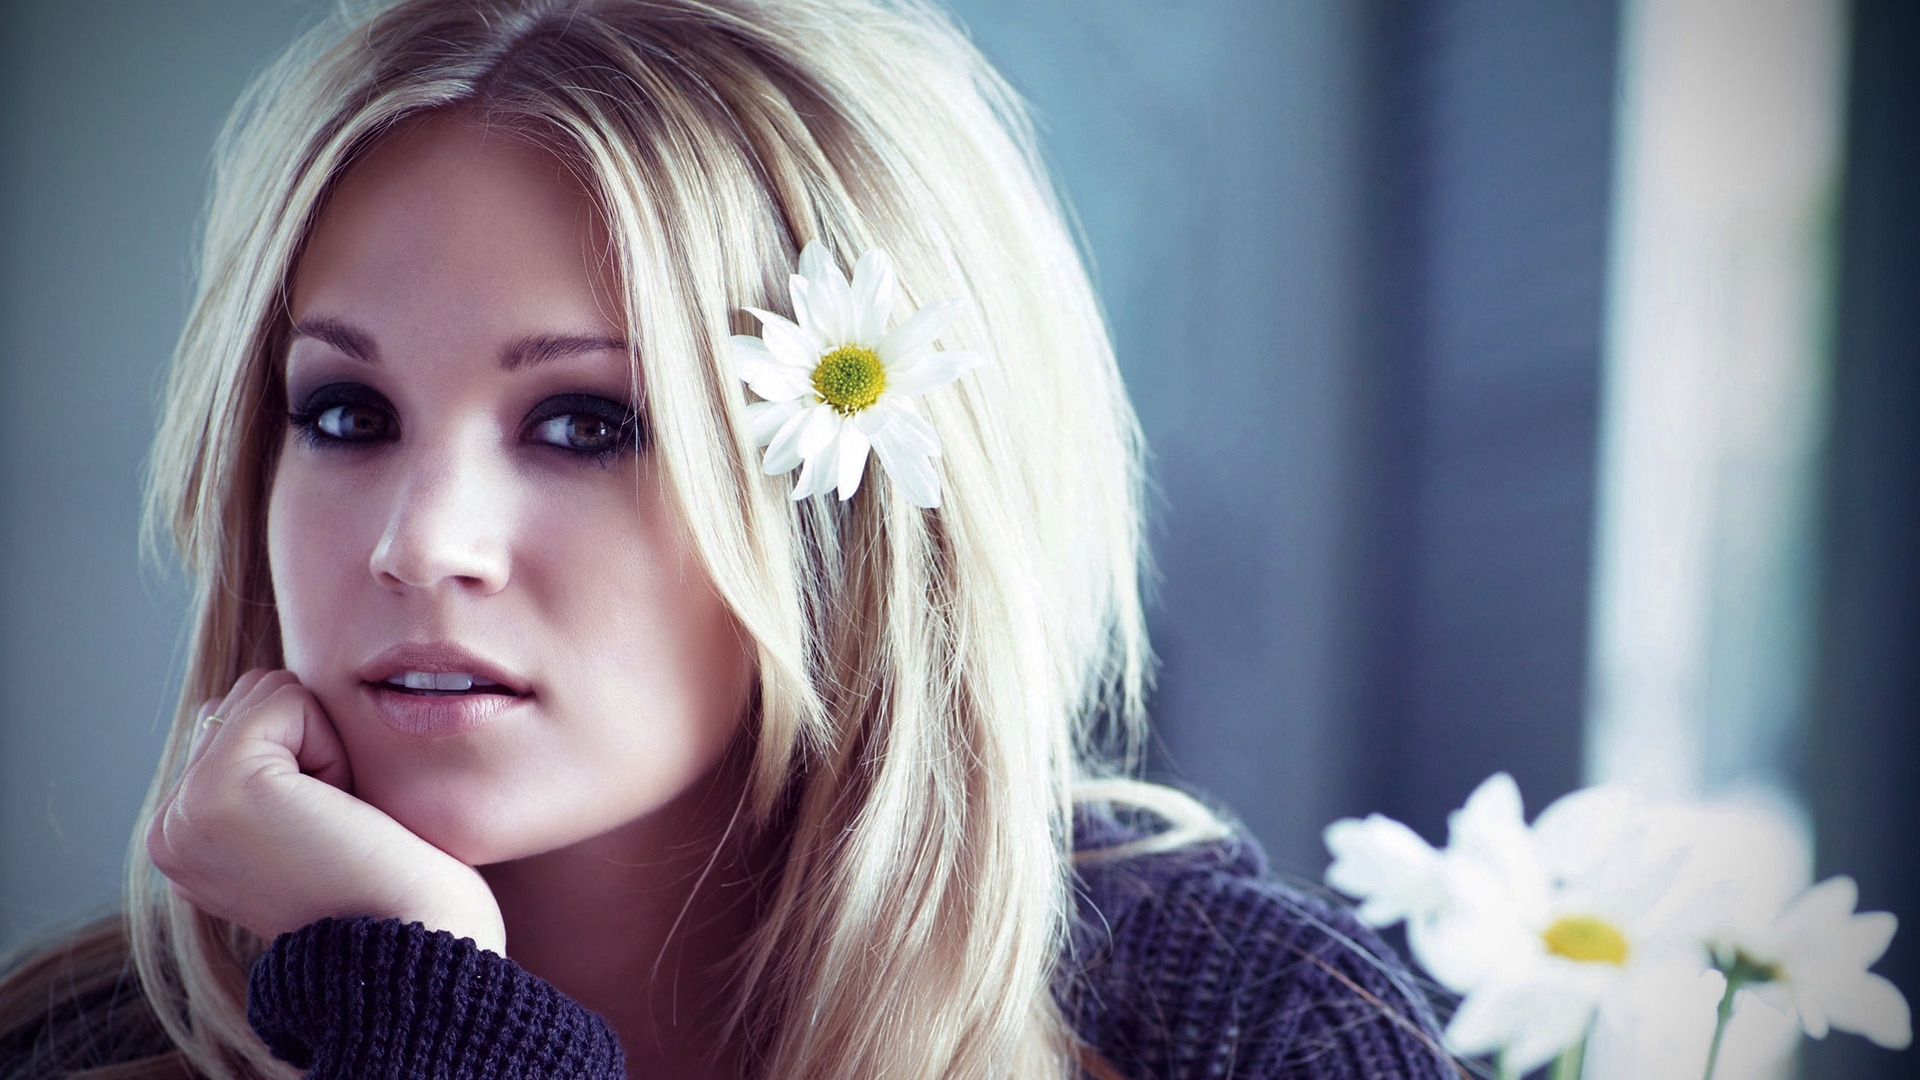 Carrie Underwood Beautiful for 1920 x 1080 HDTV 1080p resolution